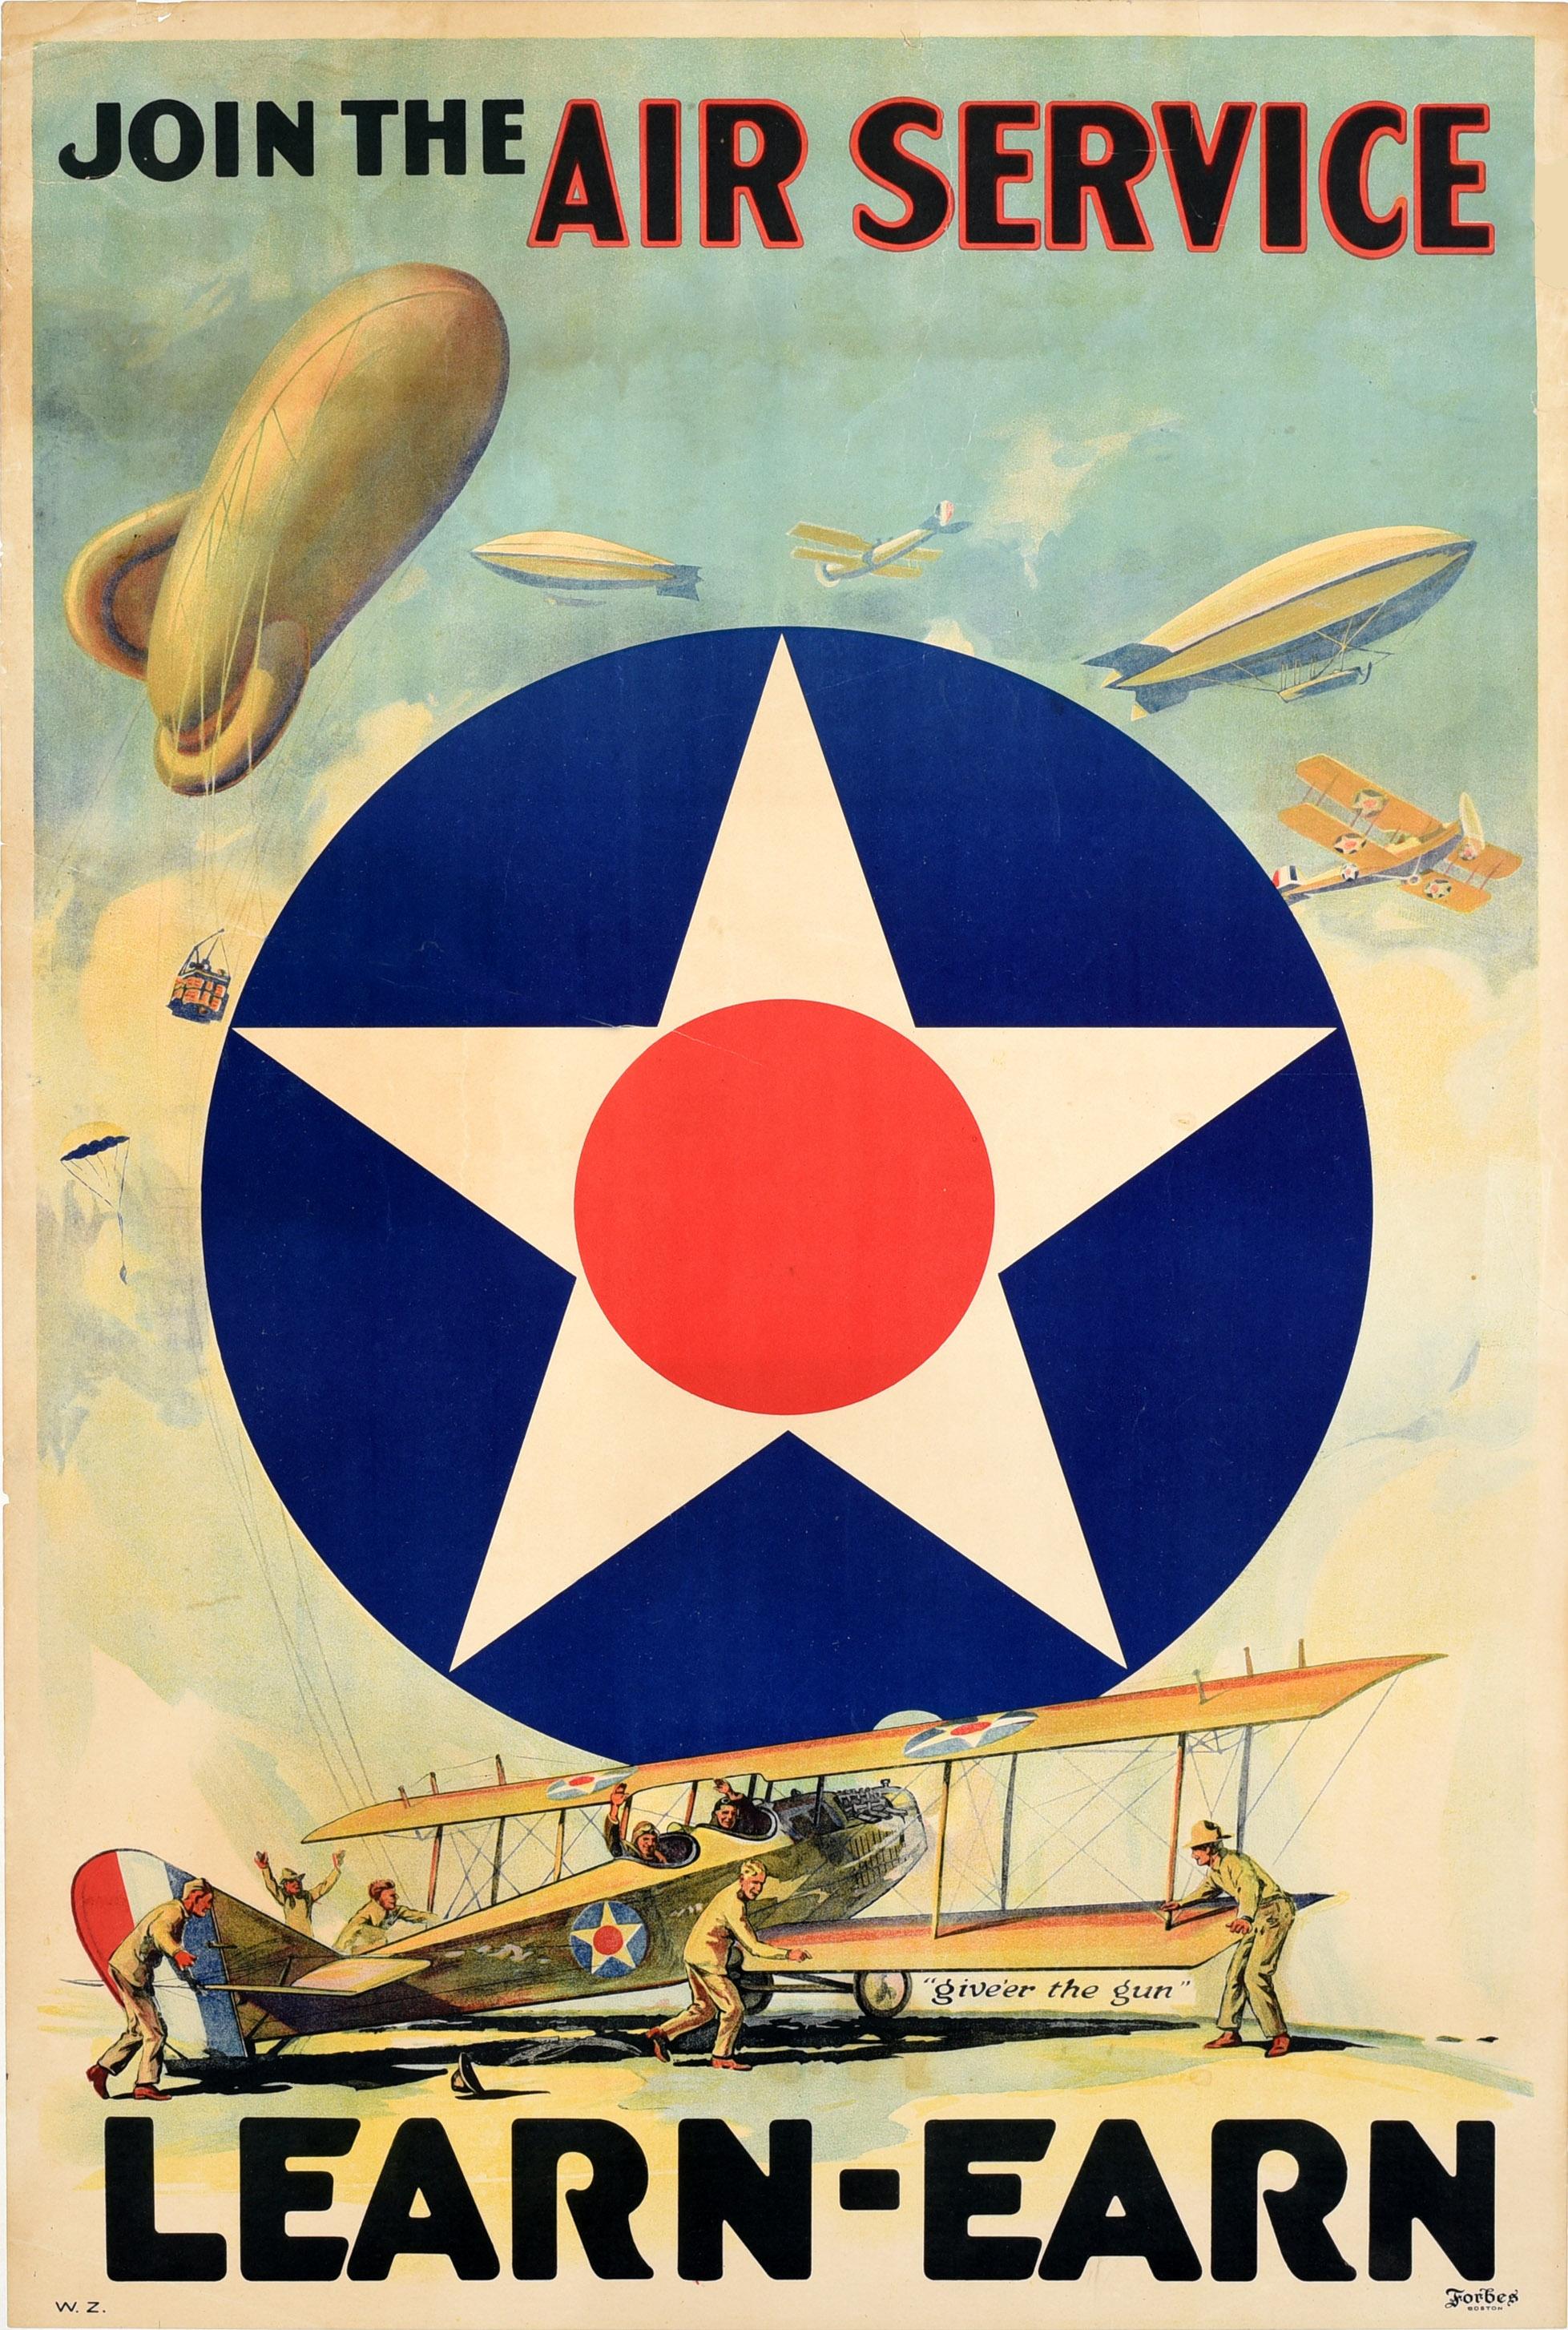 Unknown Print - Original Antique Poster Join The Air Service Learn Earn WWI US Army Air Corps